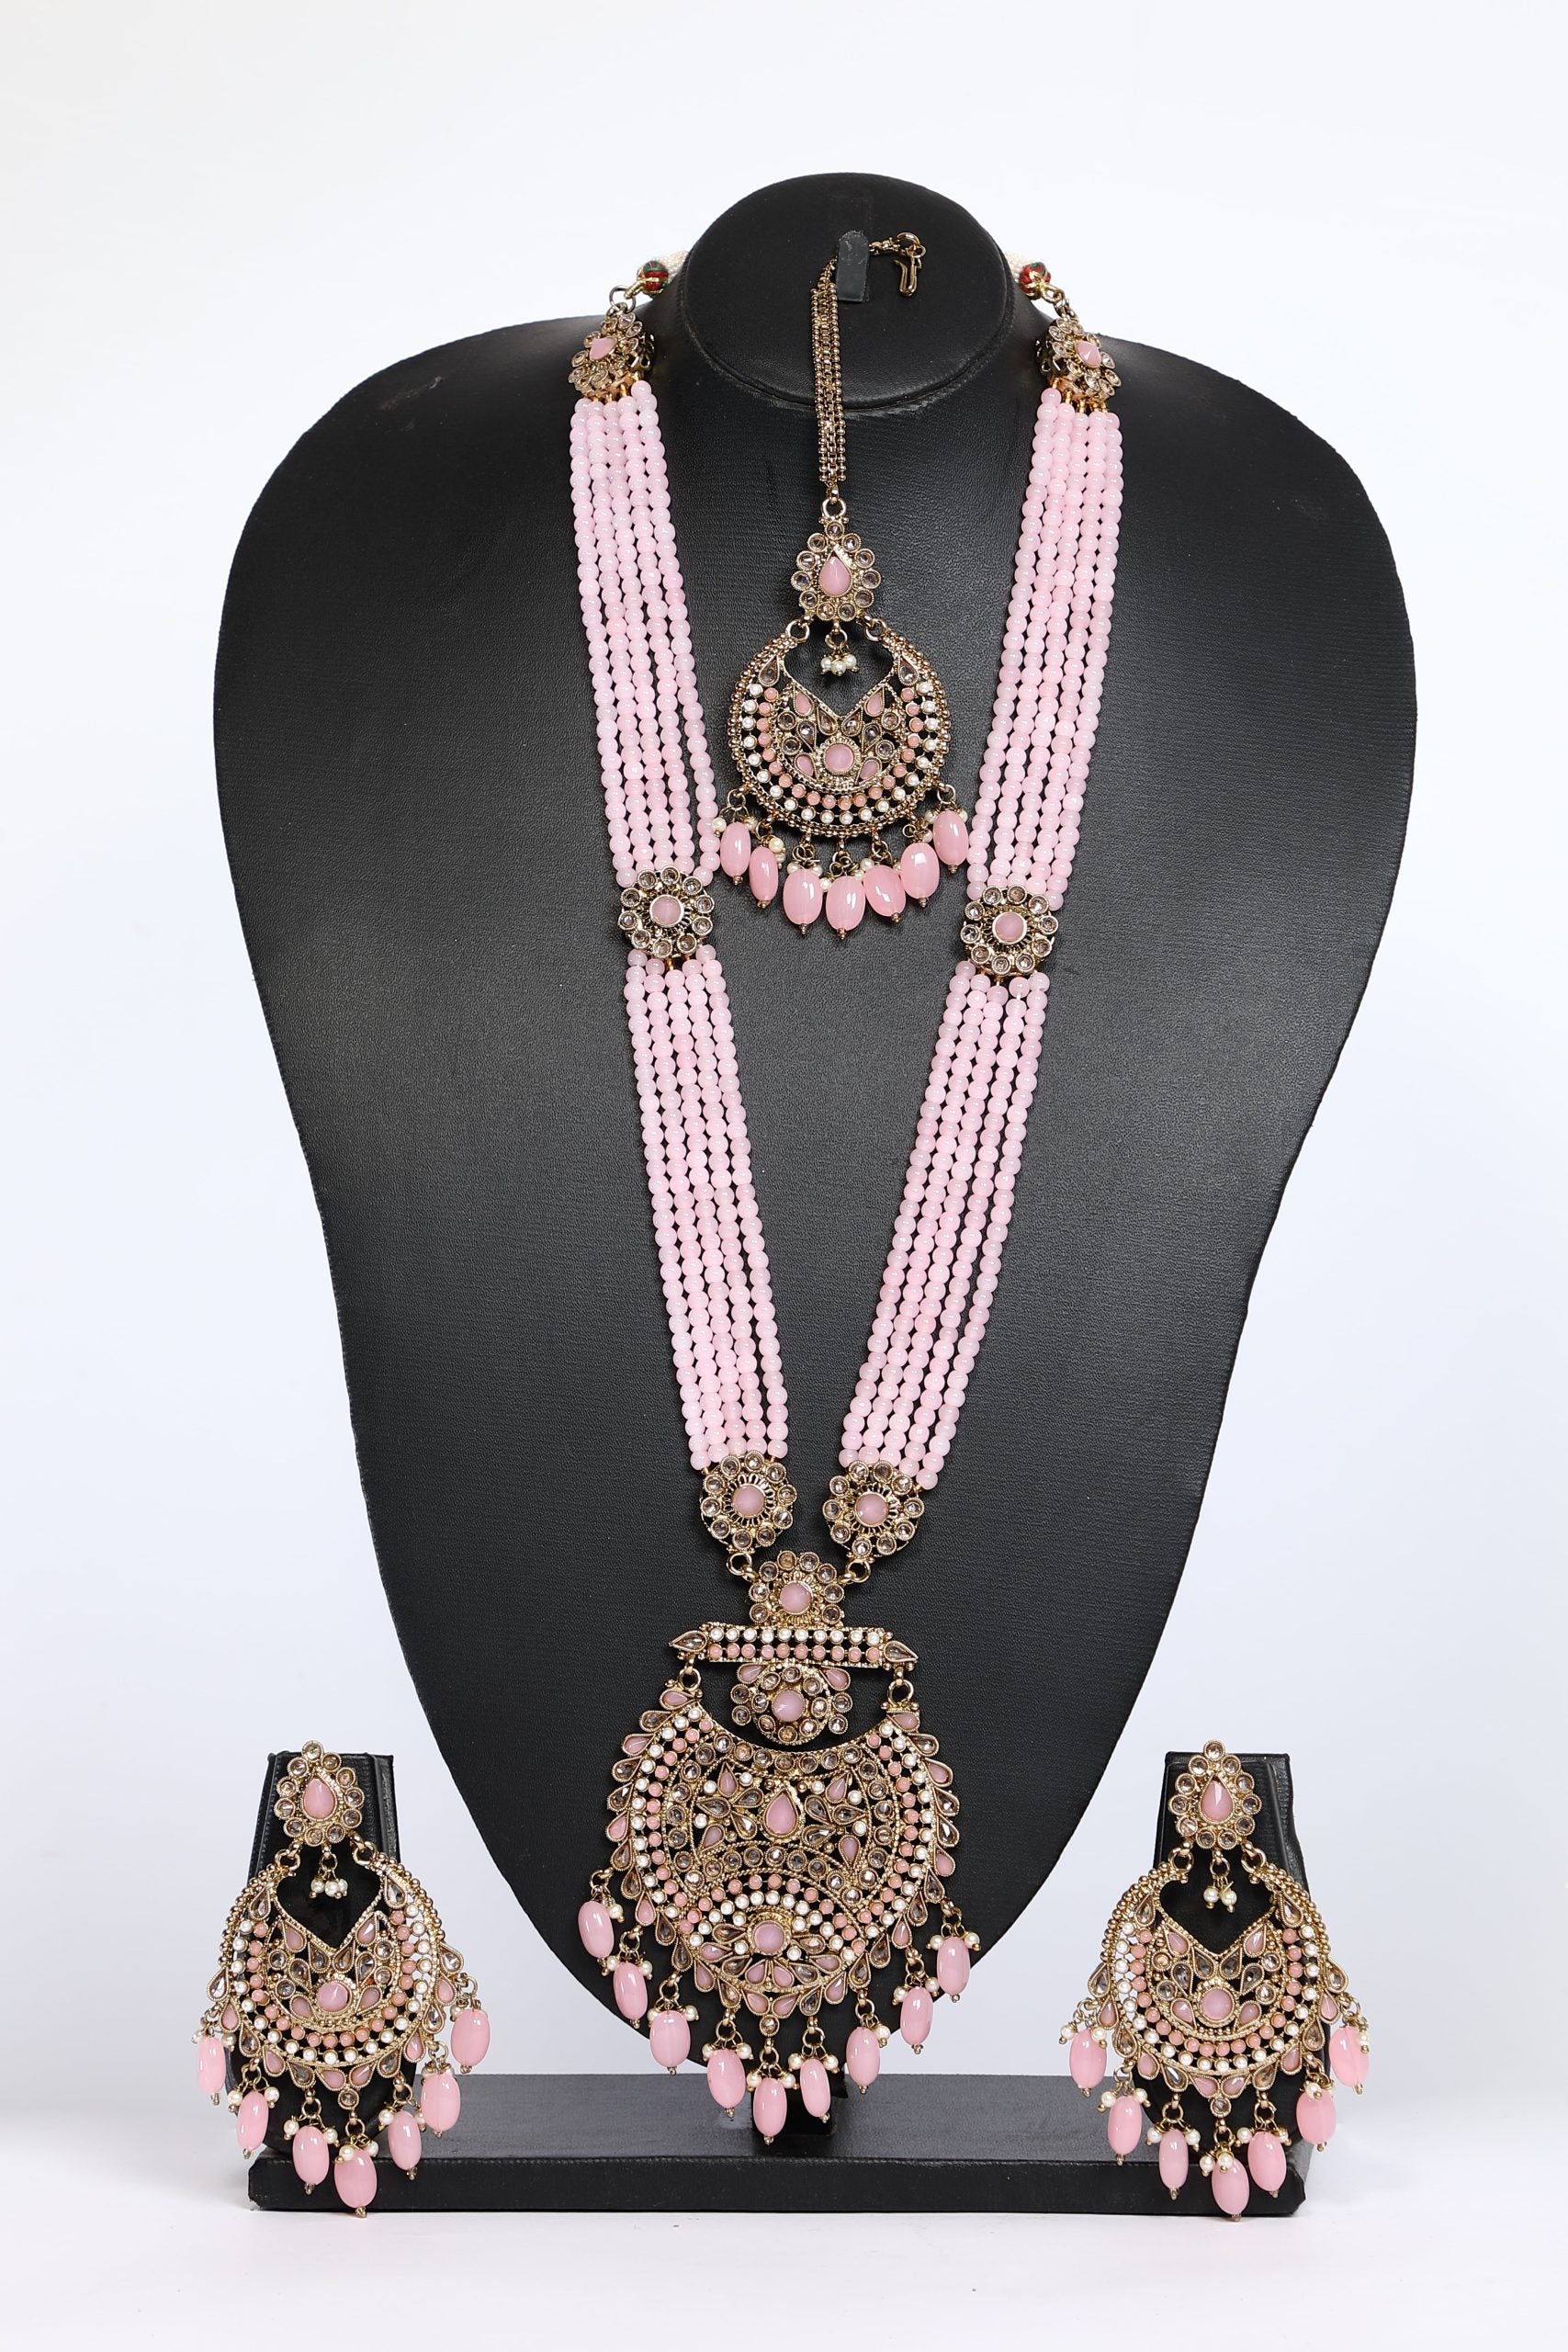 Beaded Long Necklace Set in Baby Pink Color For Bridal - 3594